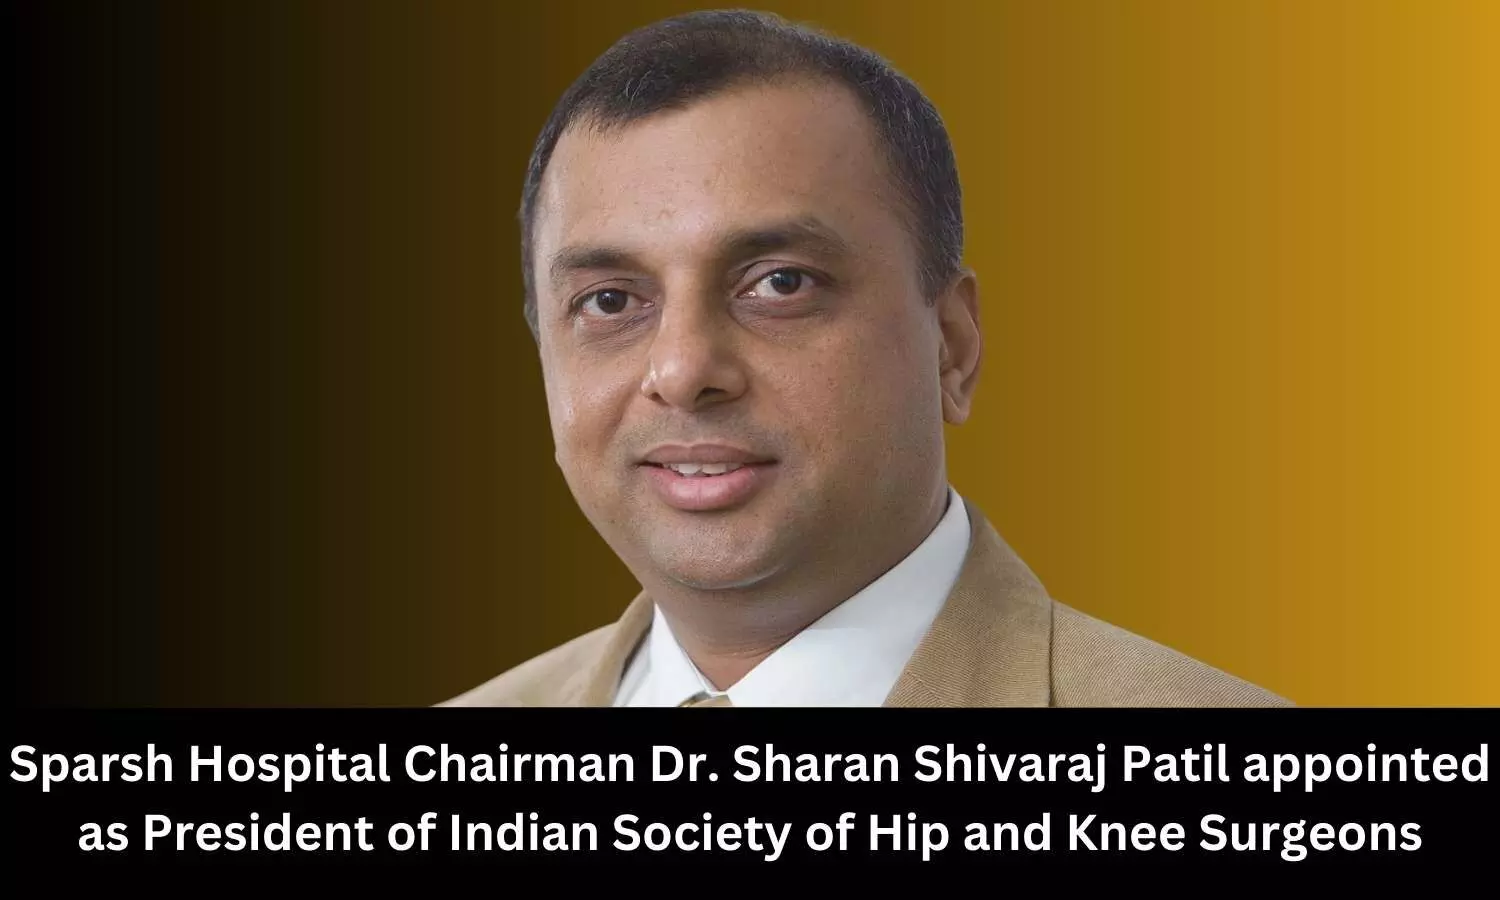 Sparsh Hospital Chairman Dr Sharan Shivaraj Patil appointed as President of Indian Society of Hip and Knee Surgeons